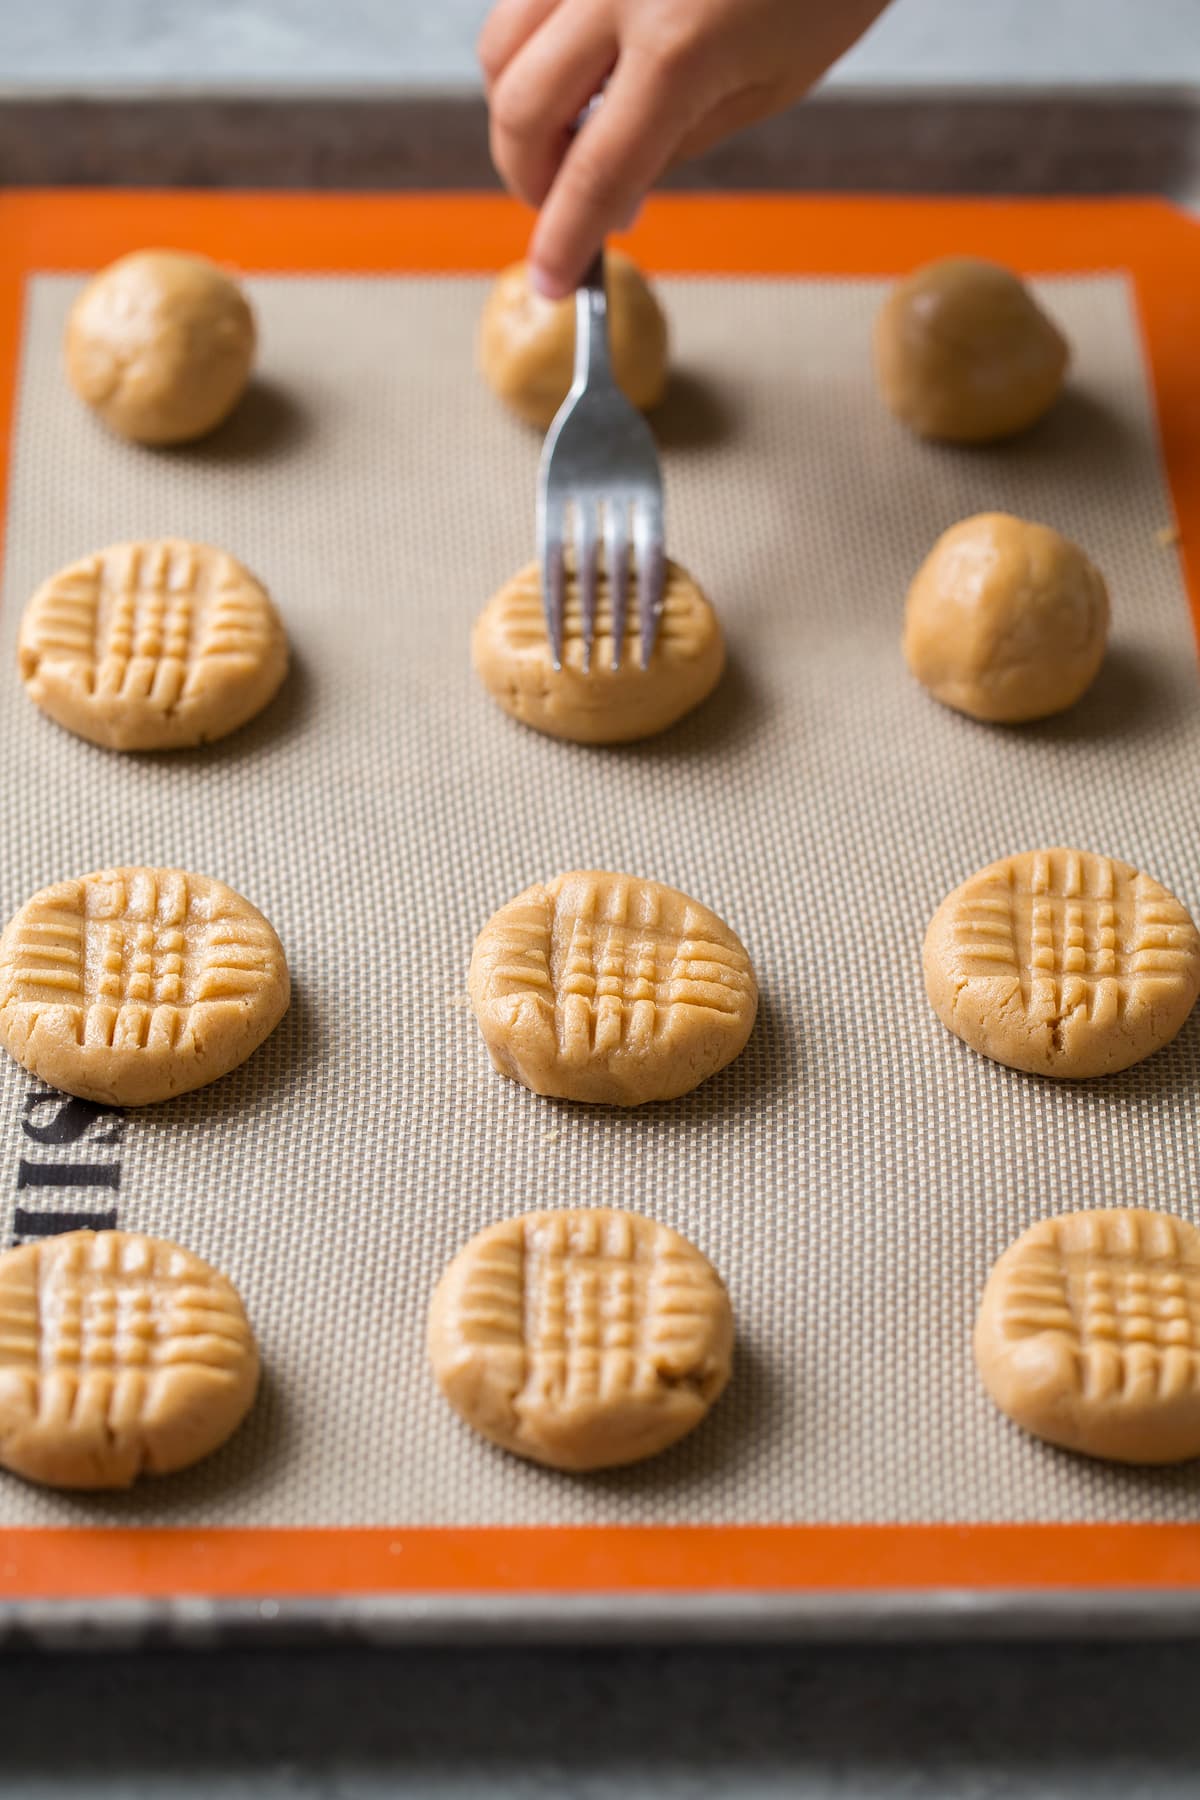 Showing how to press criss cross pattern into peanut butter cookie dough balls on baking sheet.